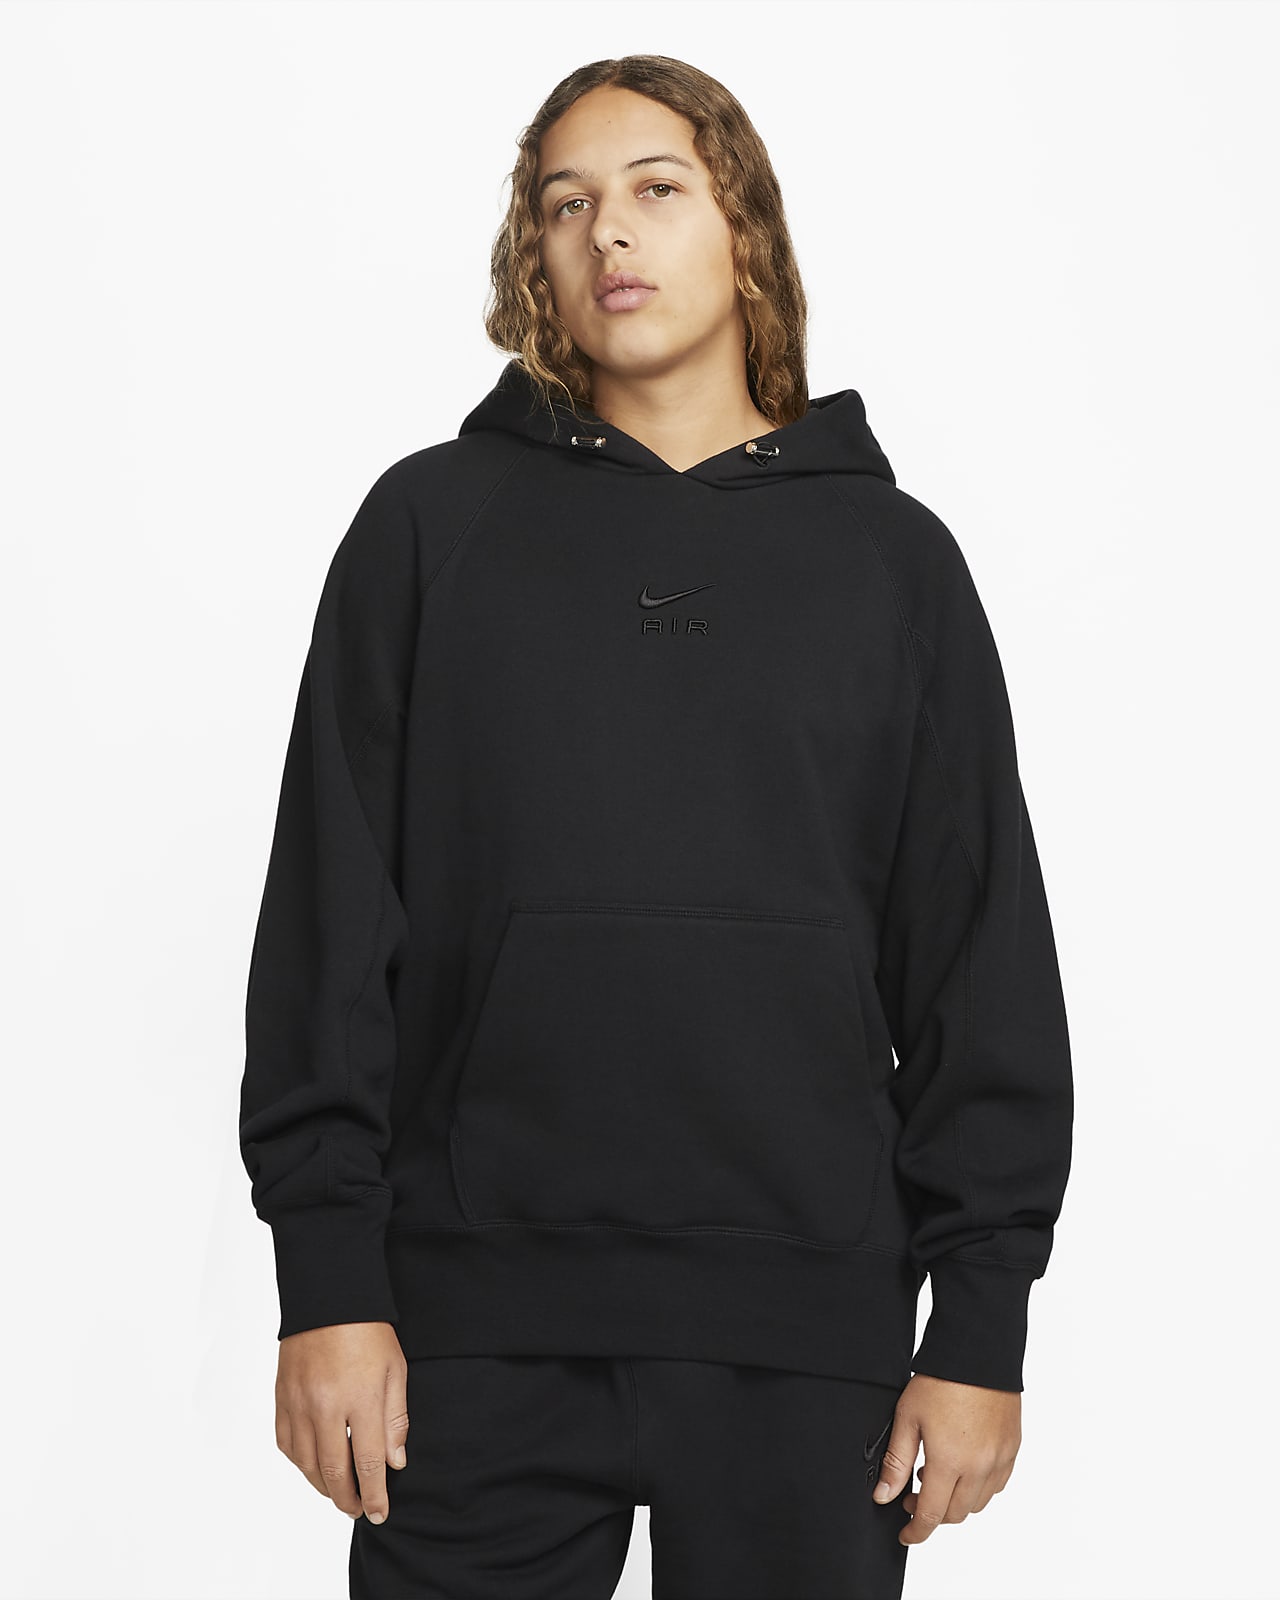 produce balance repose Nike Sportswear Air Men's French Terry Pullover Hoodie. Nike.com